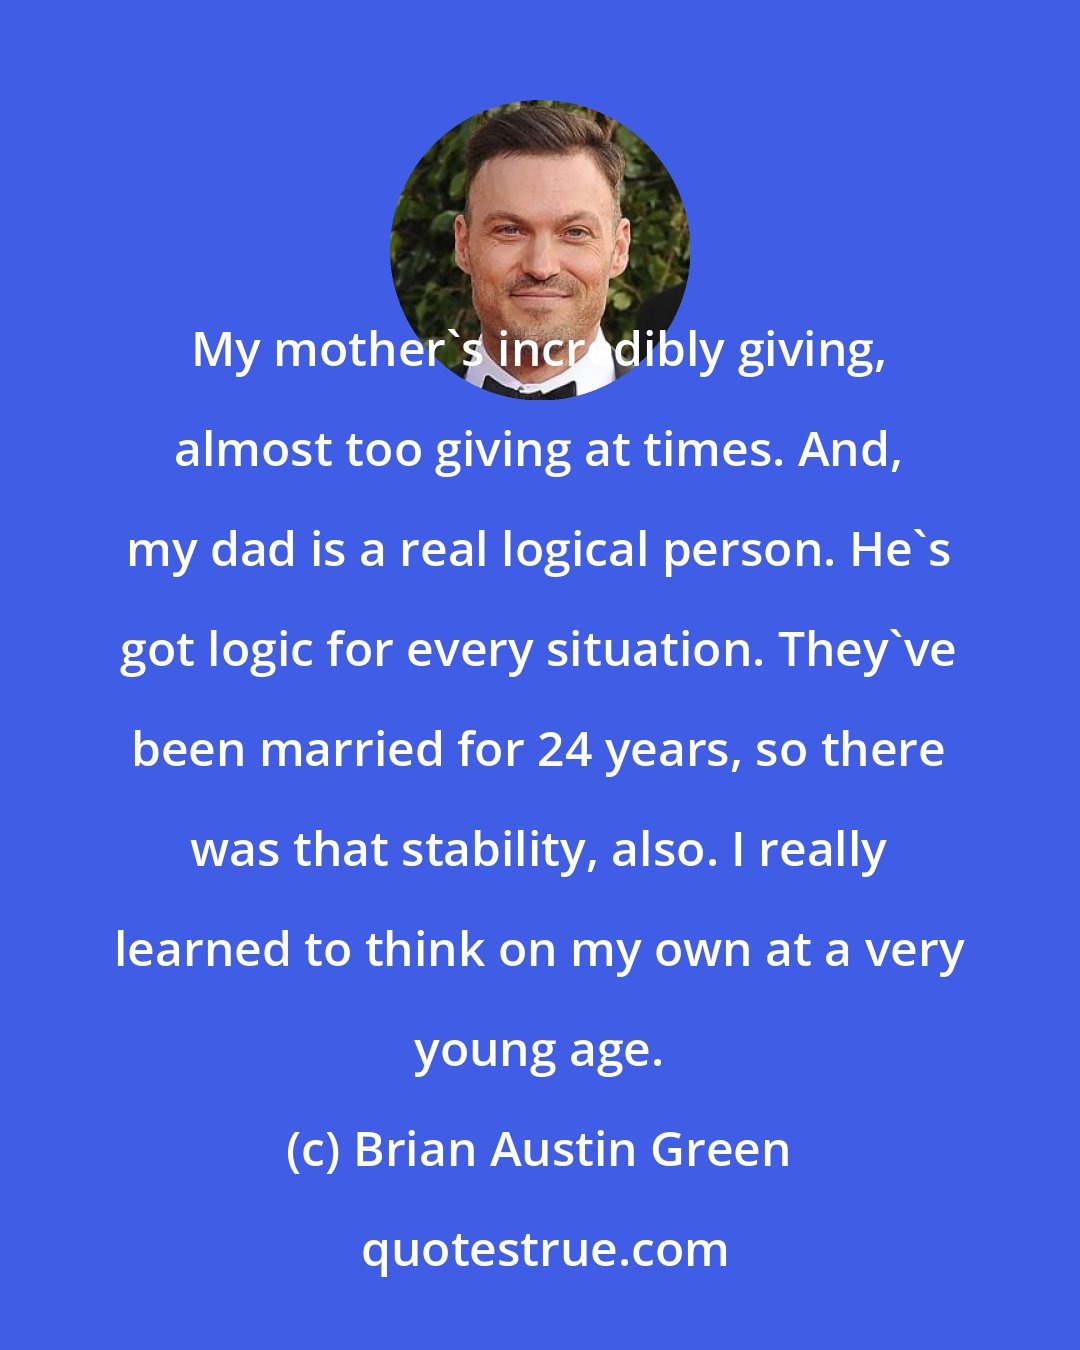 Brian Austin Green: My mother's incredibly giving, almost too giving at times. And, my dad is a real logical person. He's got logic for every situation. They've been married for 24 years, so there was that stability, also. I really learned to think on my own at a very young age.